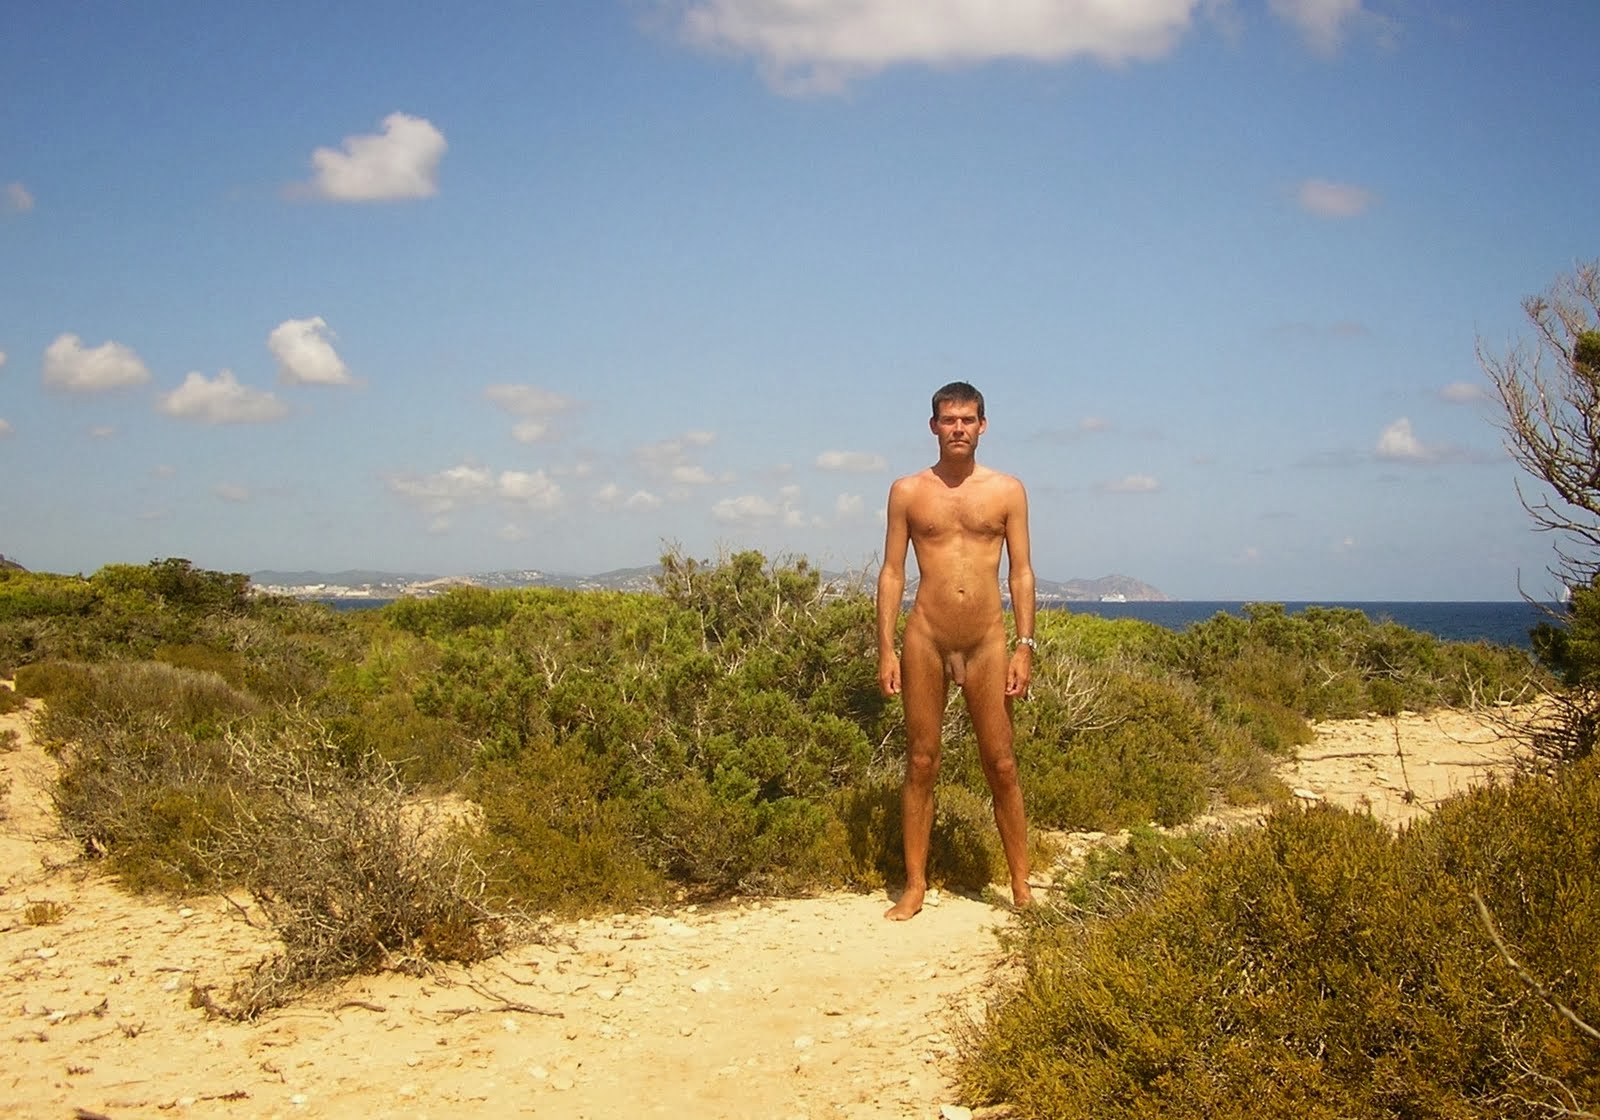 French nudist beach dagde best adult free images